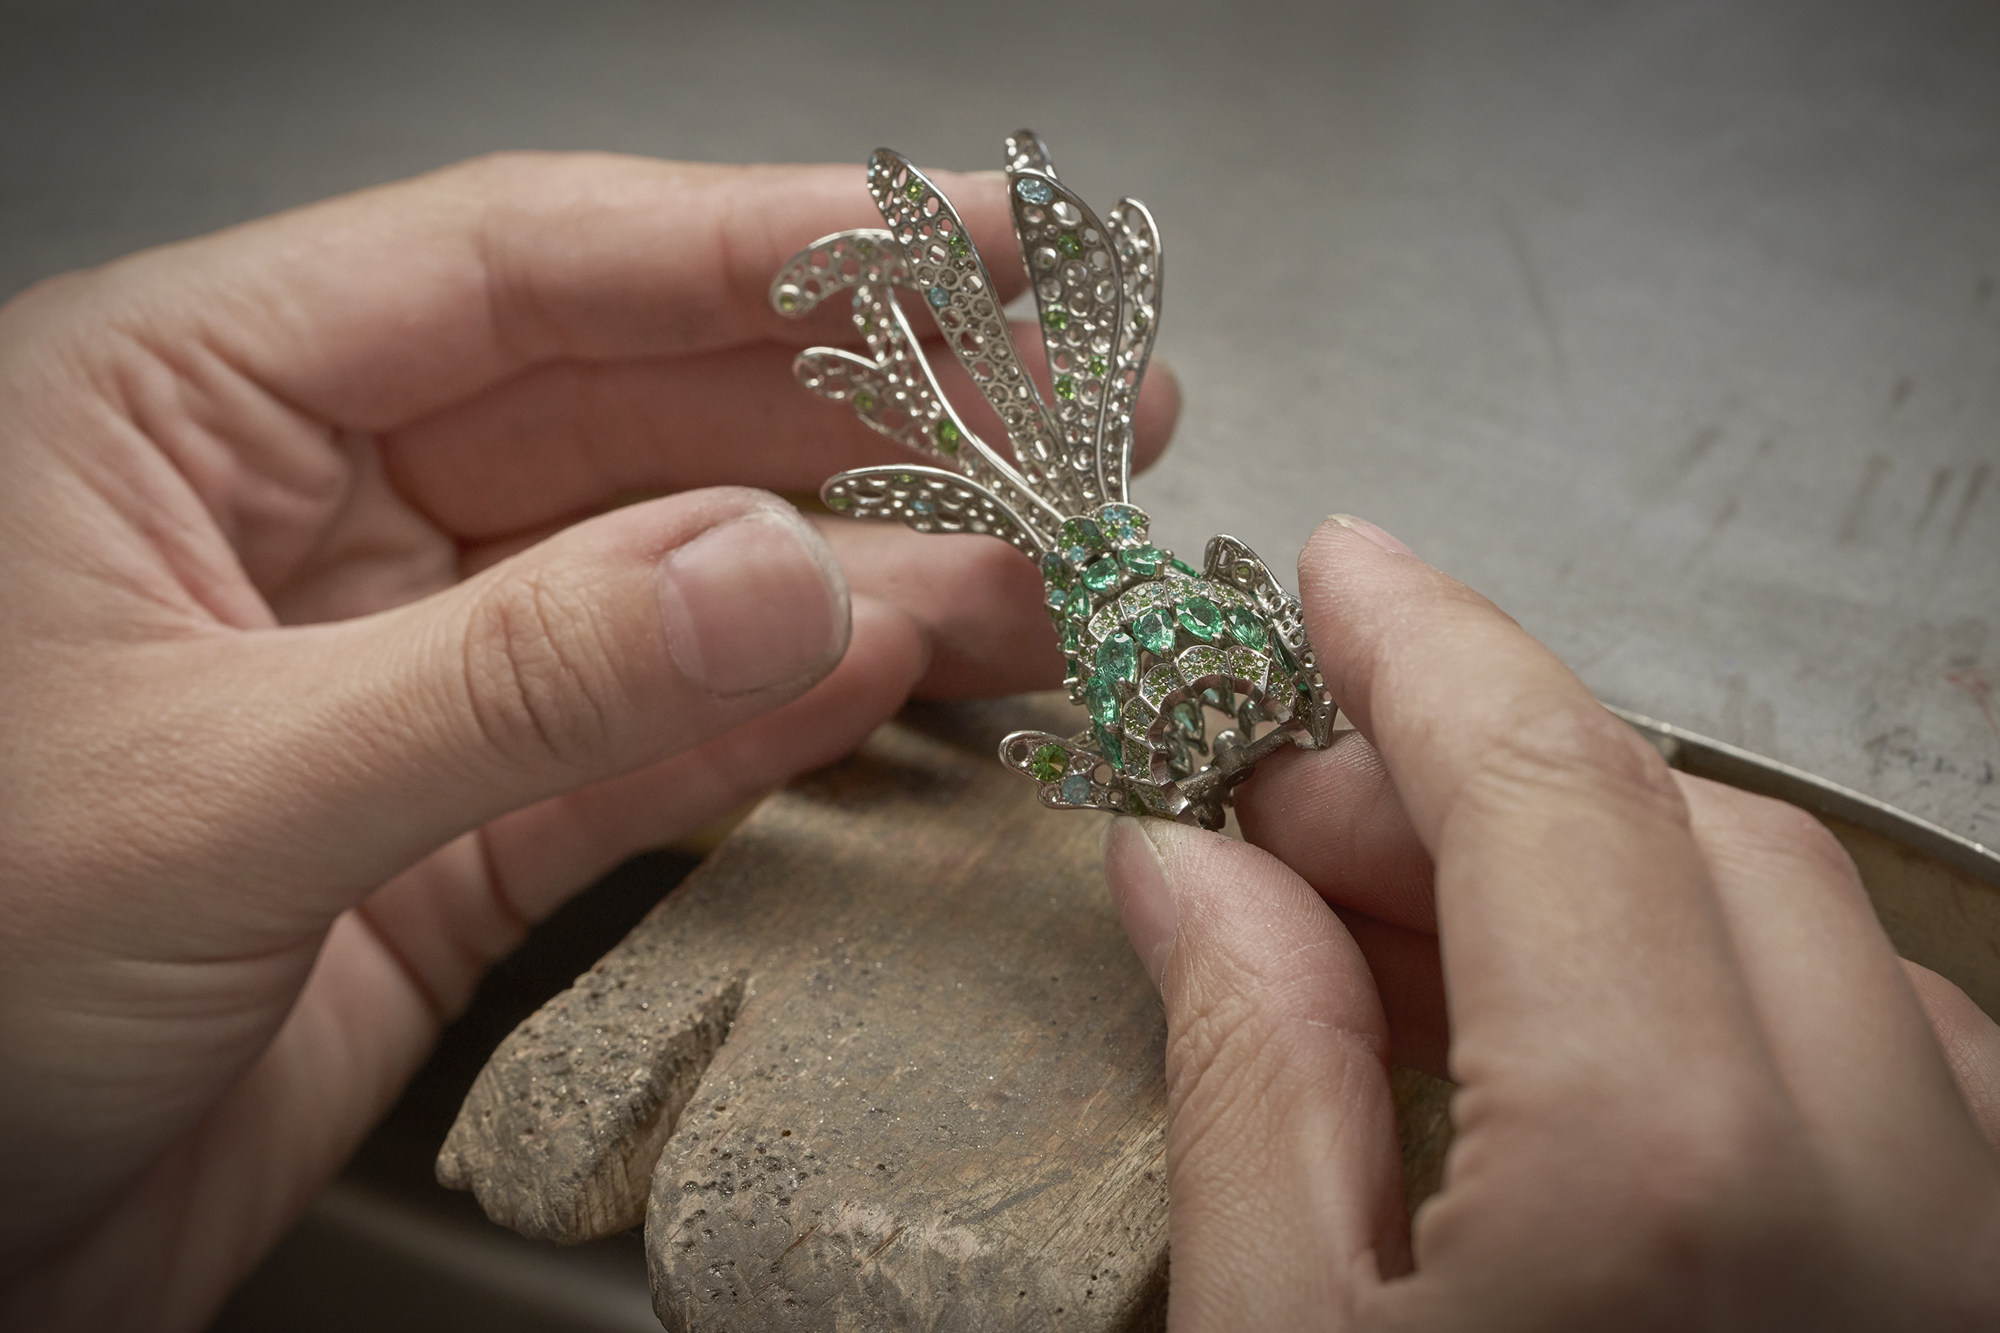 Chopard and other high jewellery brands love to mimic the wonders of nature in their rings, brooches, bracelets and earrings. Photo: Chopard